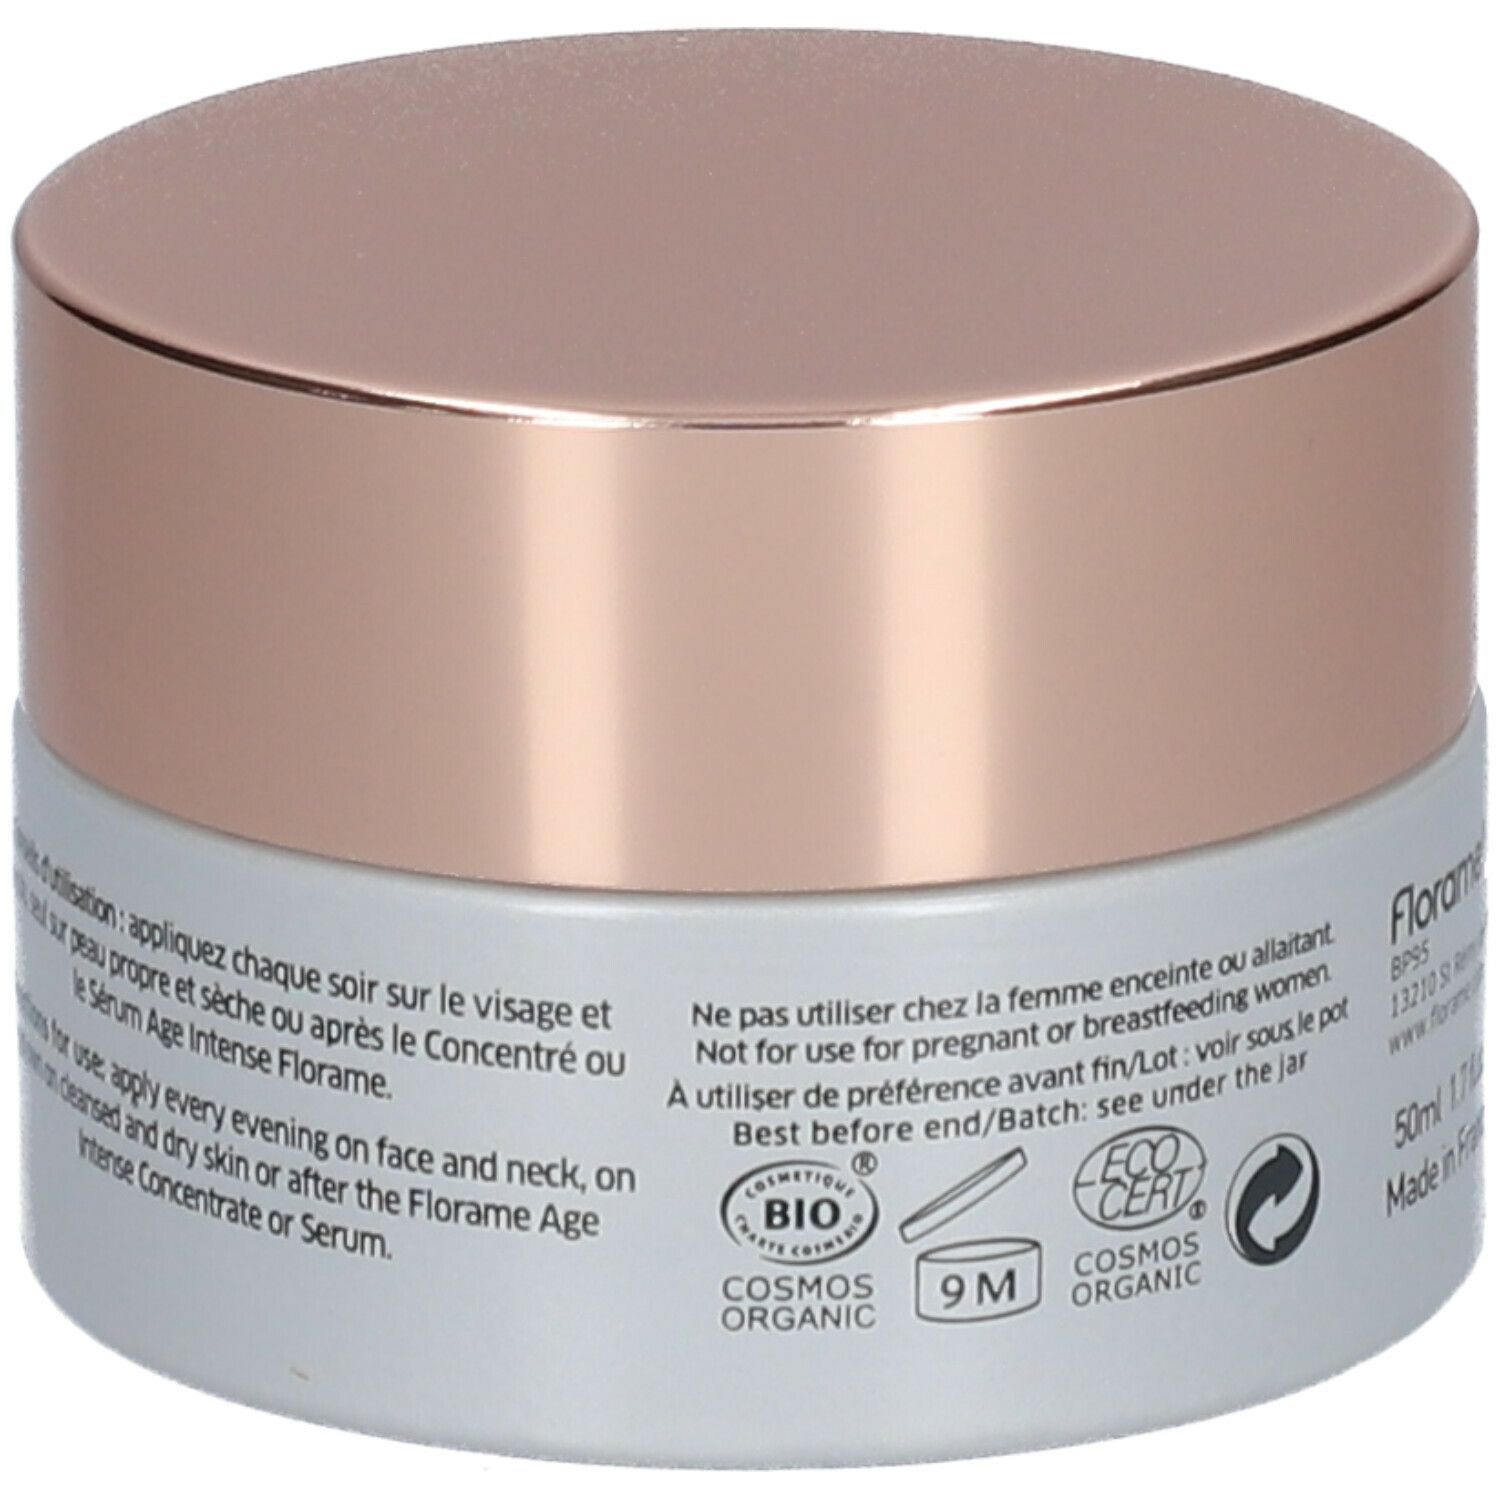 Florame AGE INTENSE Restructuring Balm Night